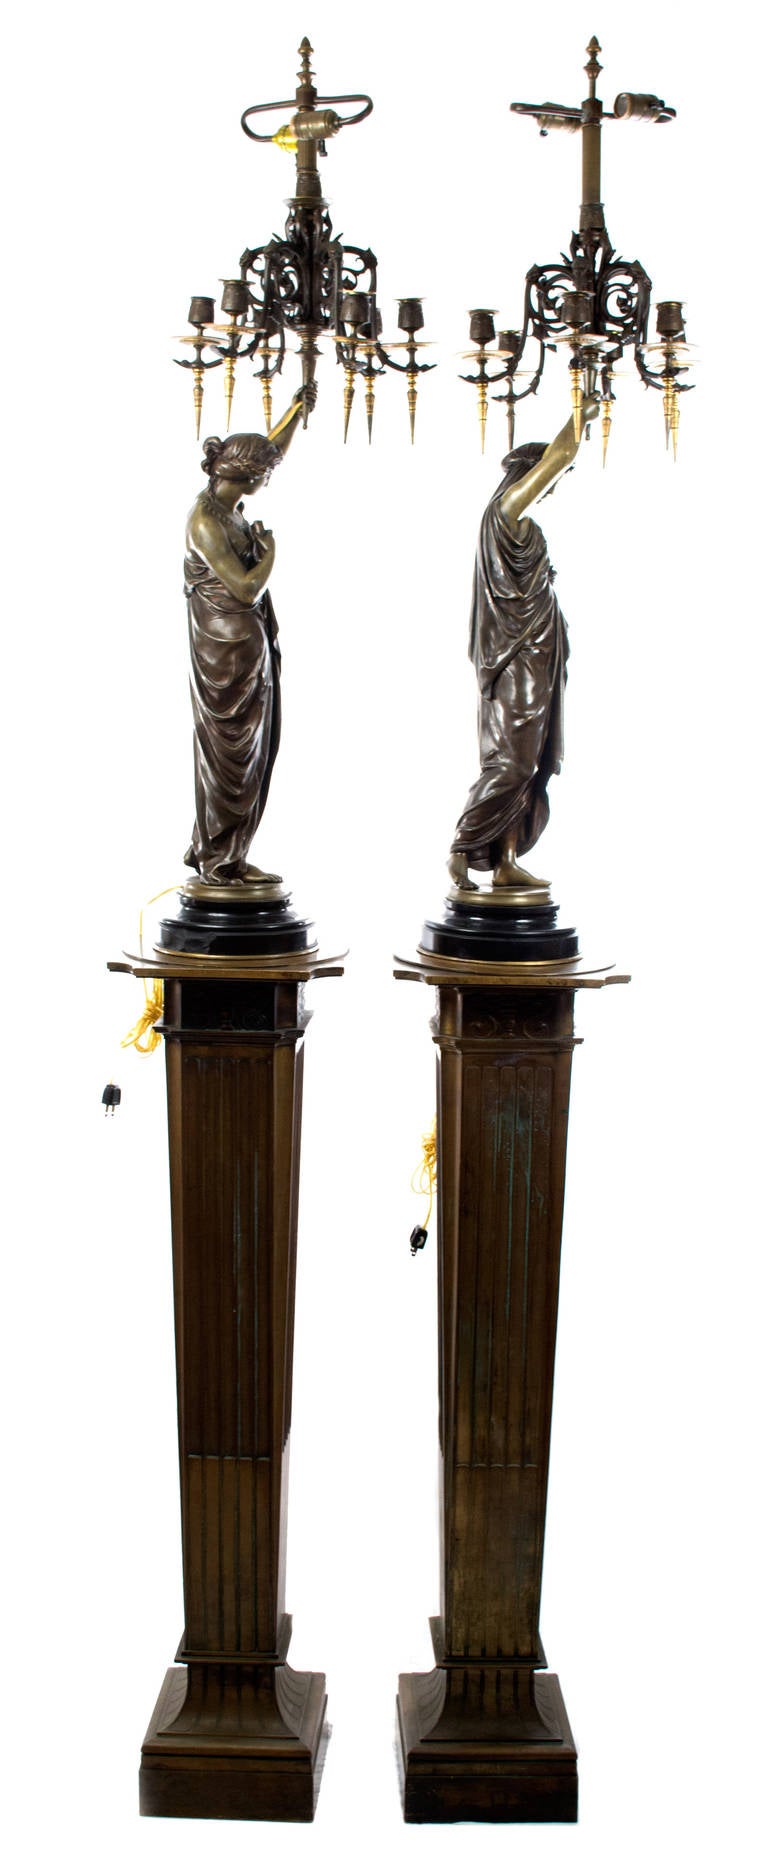 French Pair of Monumental Bronze Candelabra Sculptures on Stands by Émile Picault